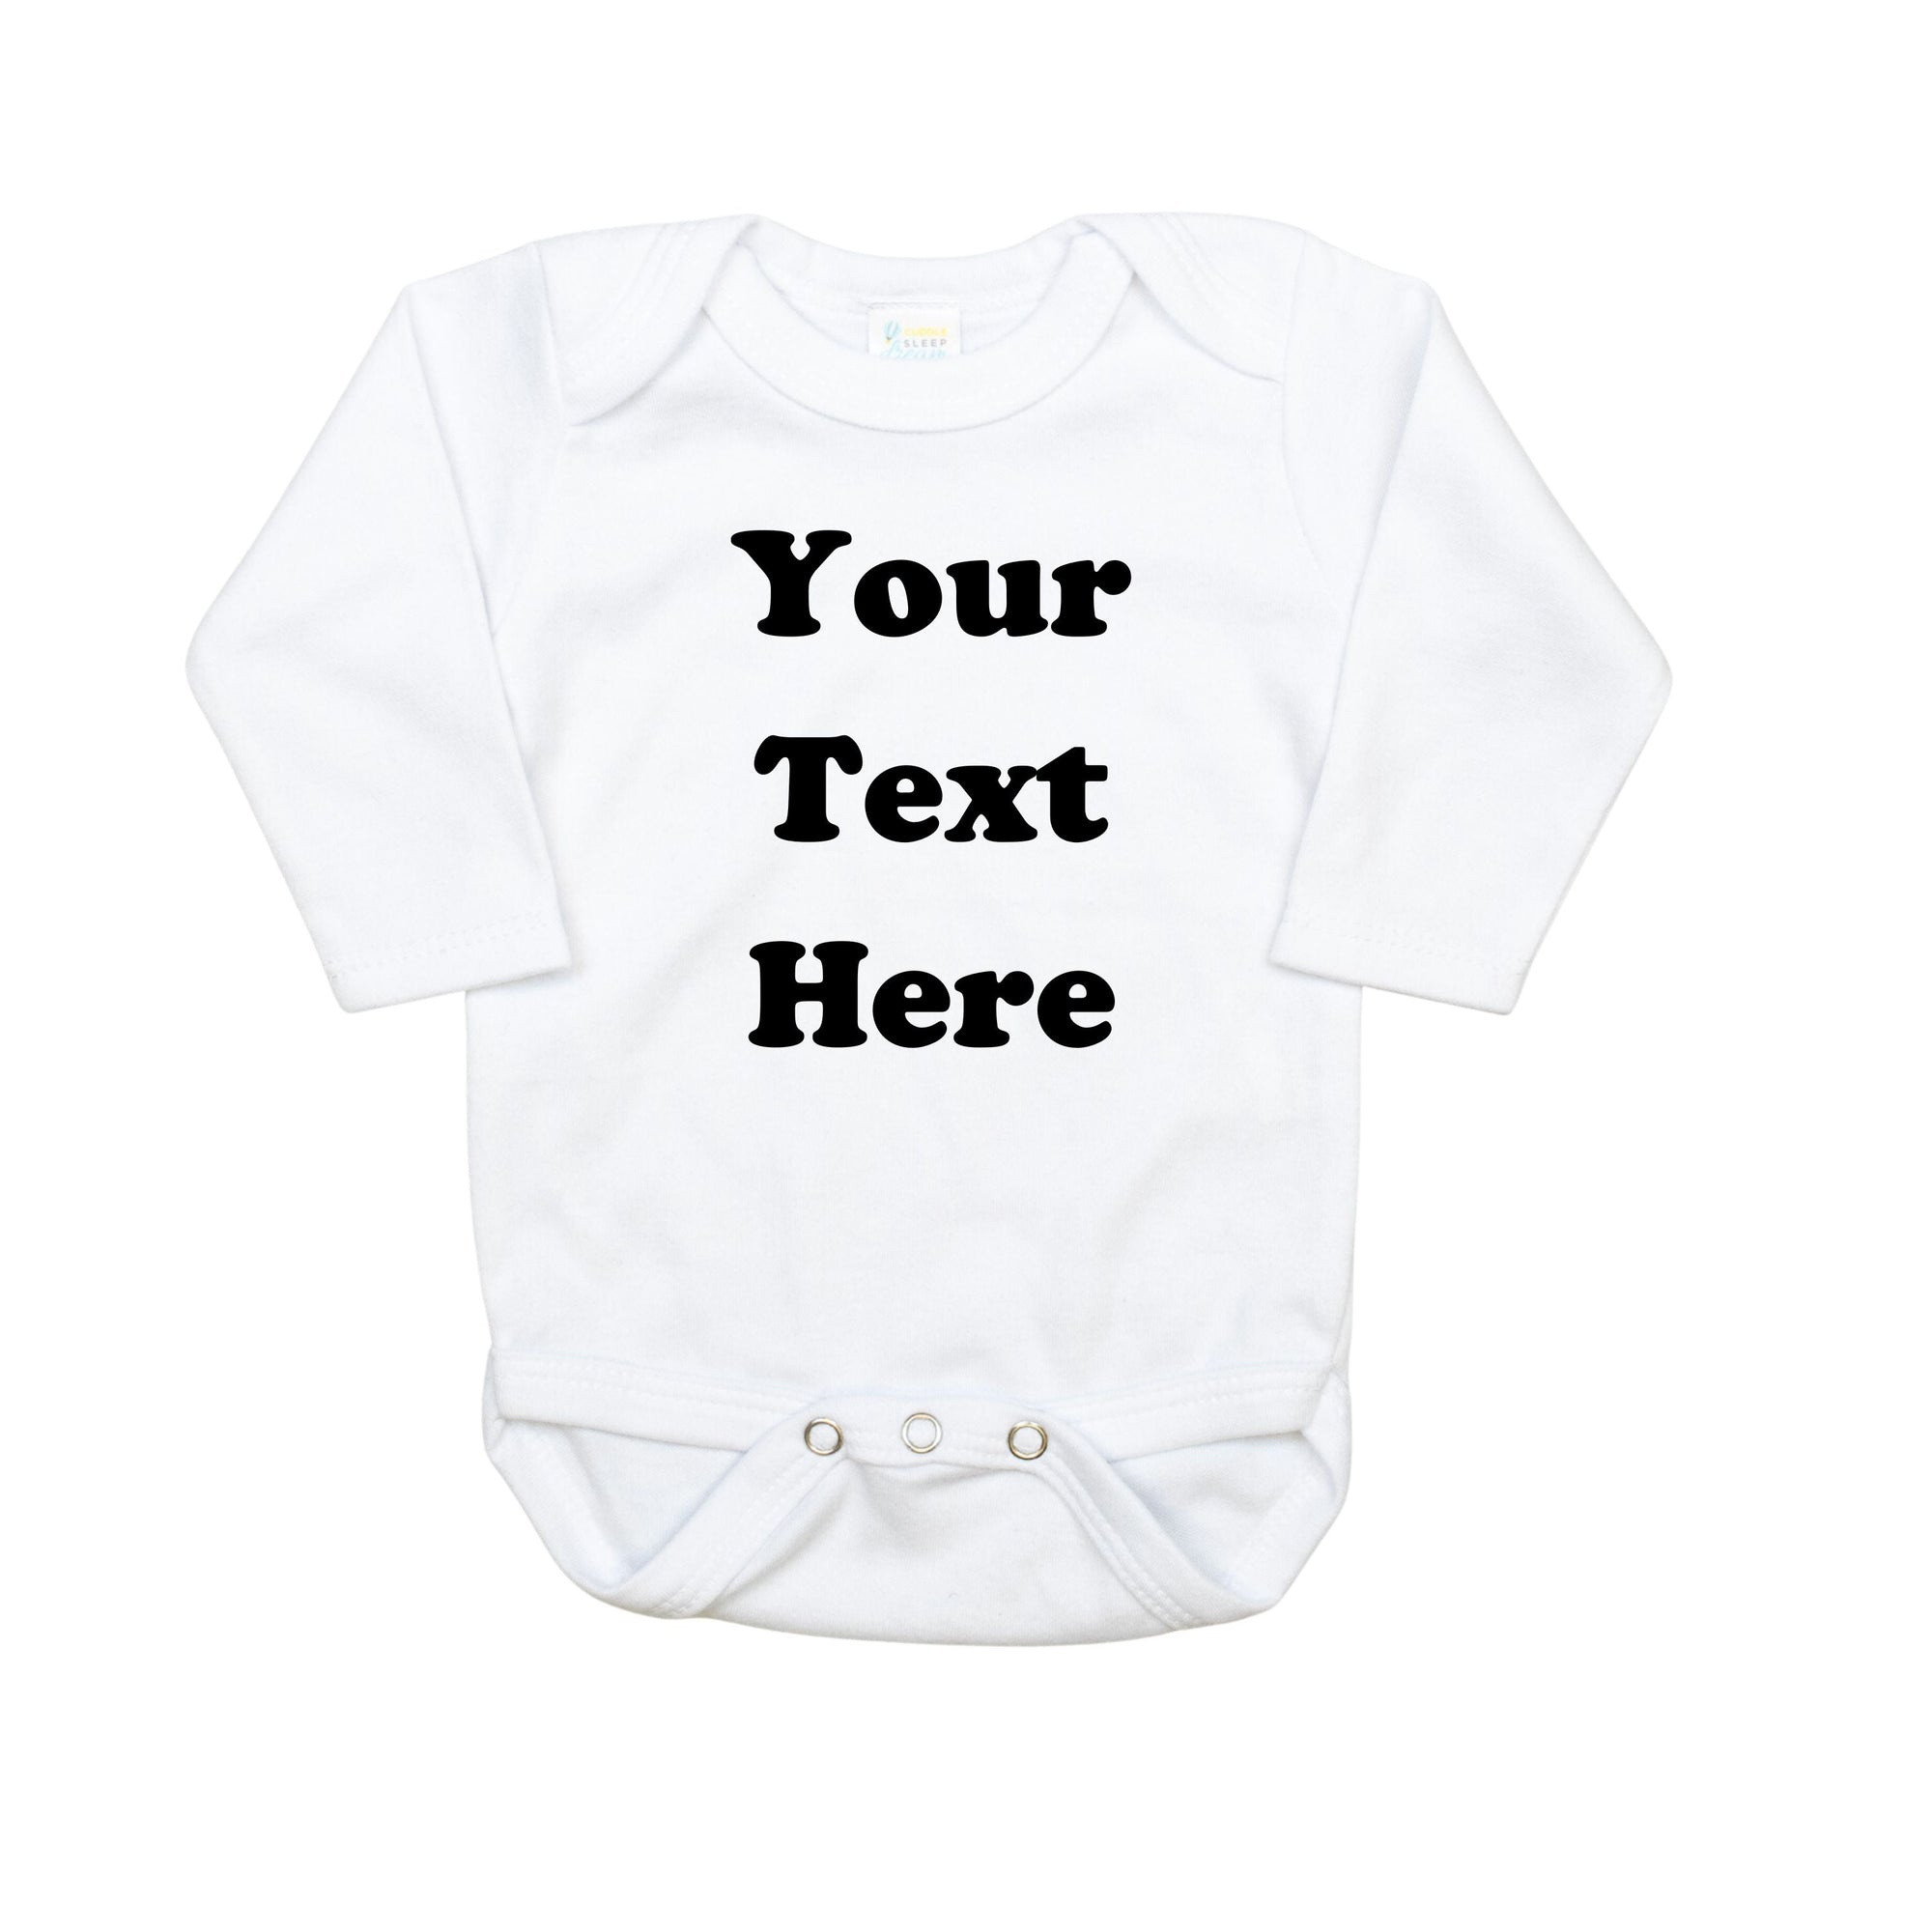 Cuddle Sleep Dream Your Message Here |  Infant Bodysuit